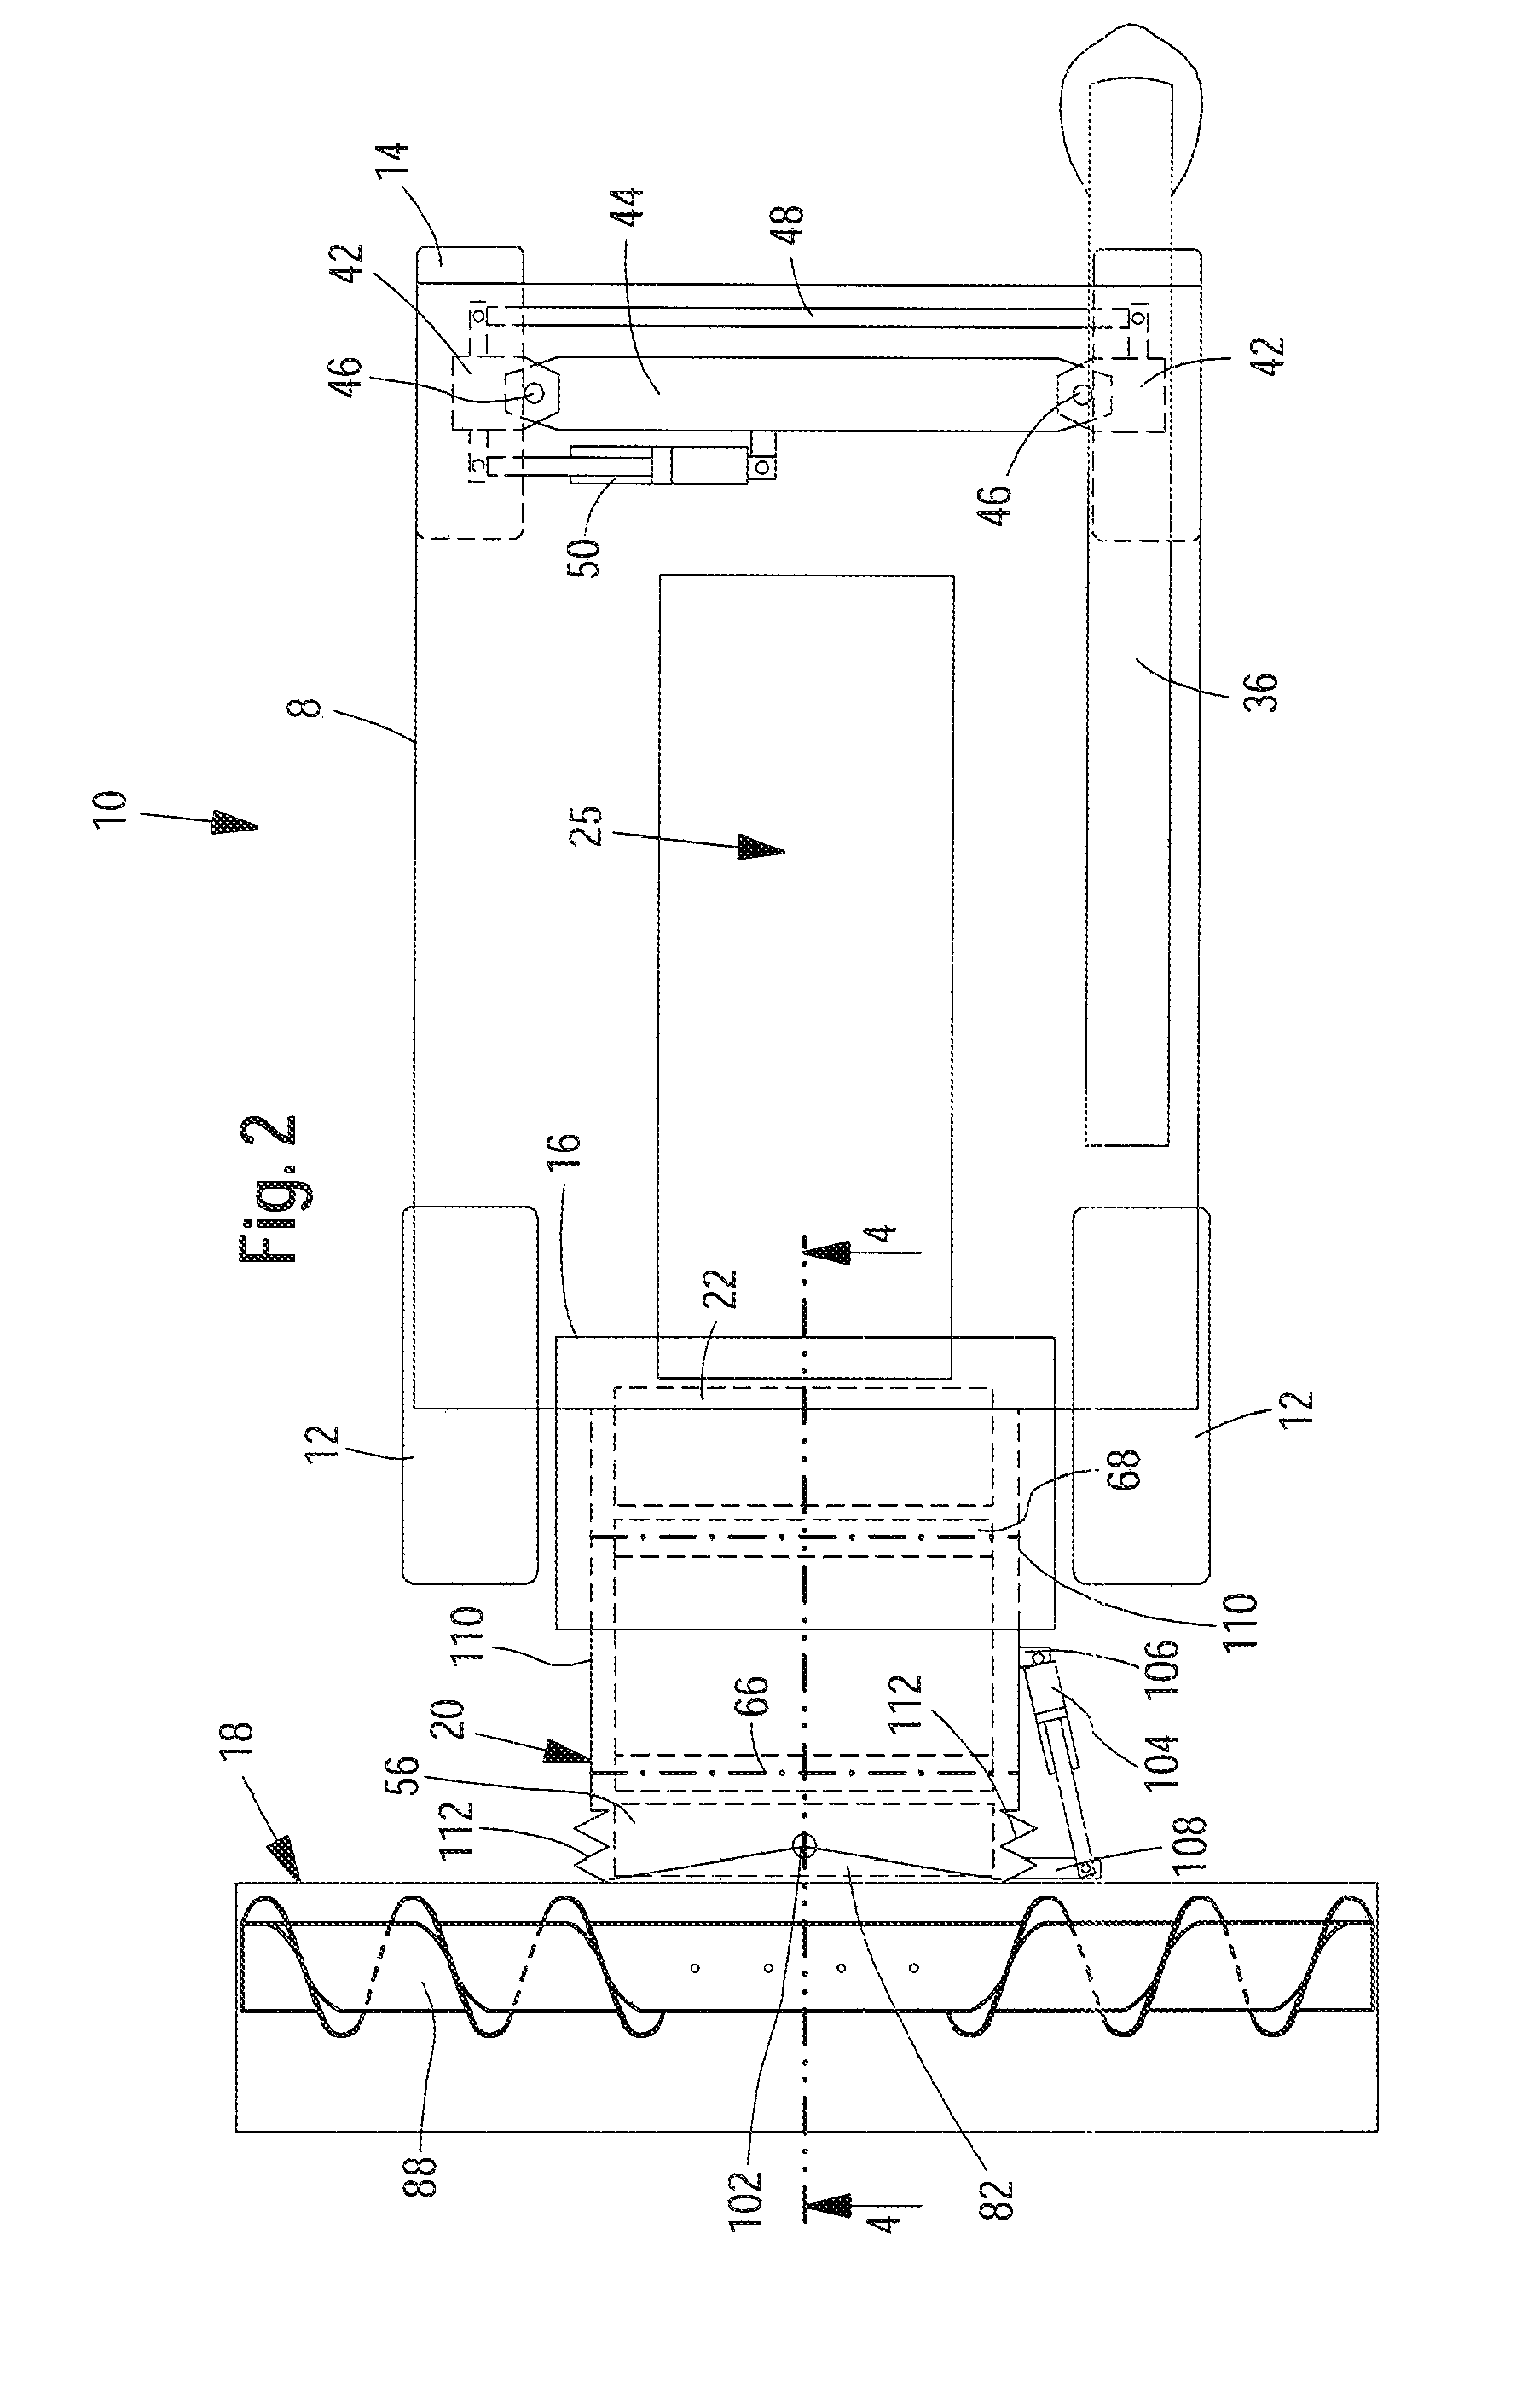 Self-propelled harvesting machine with a front harvesting attachment that can be pivoted about a vertical axis